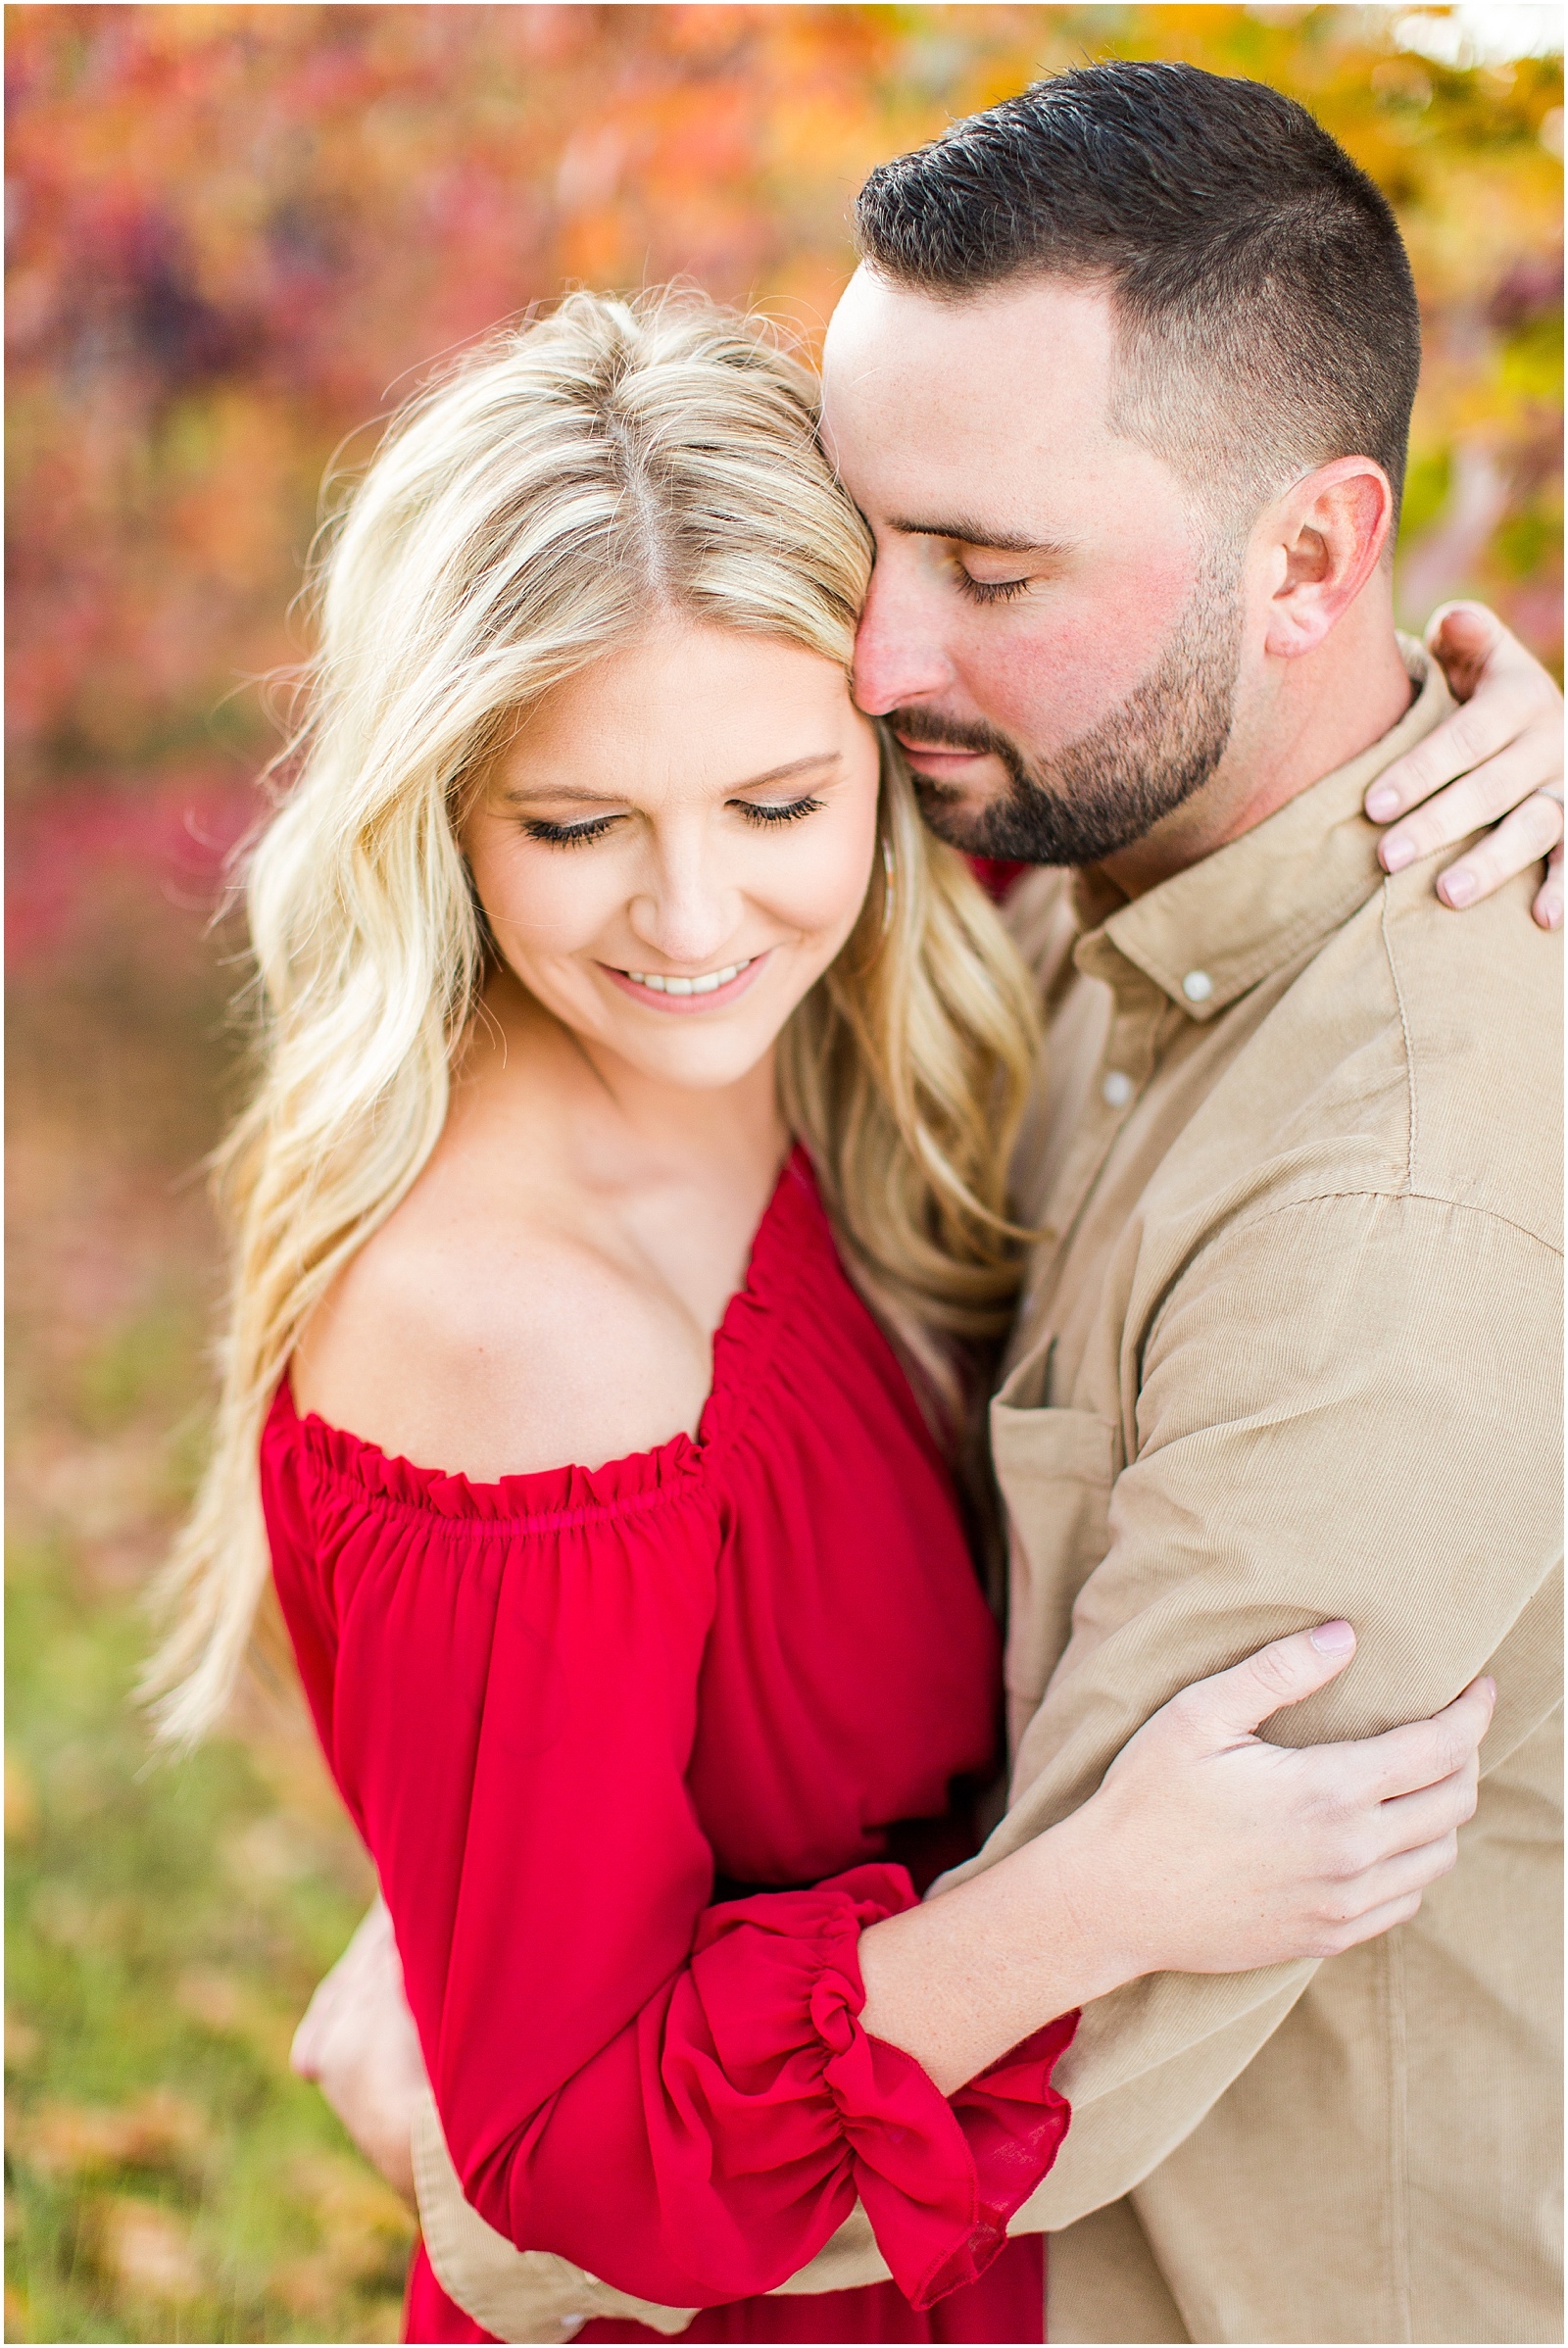 A Southern Indiana Engagement Session | Charleston and Erin | Bret and Brandie Photography039.jpg